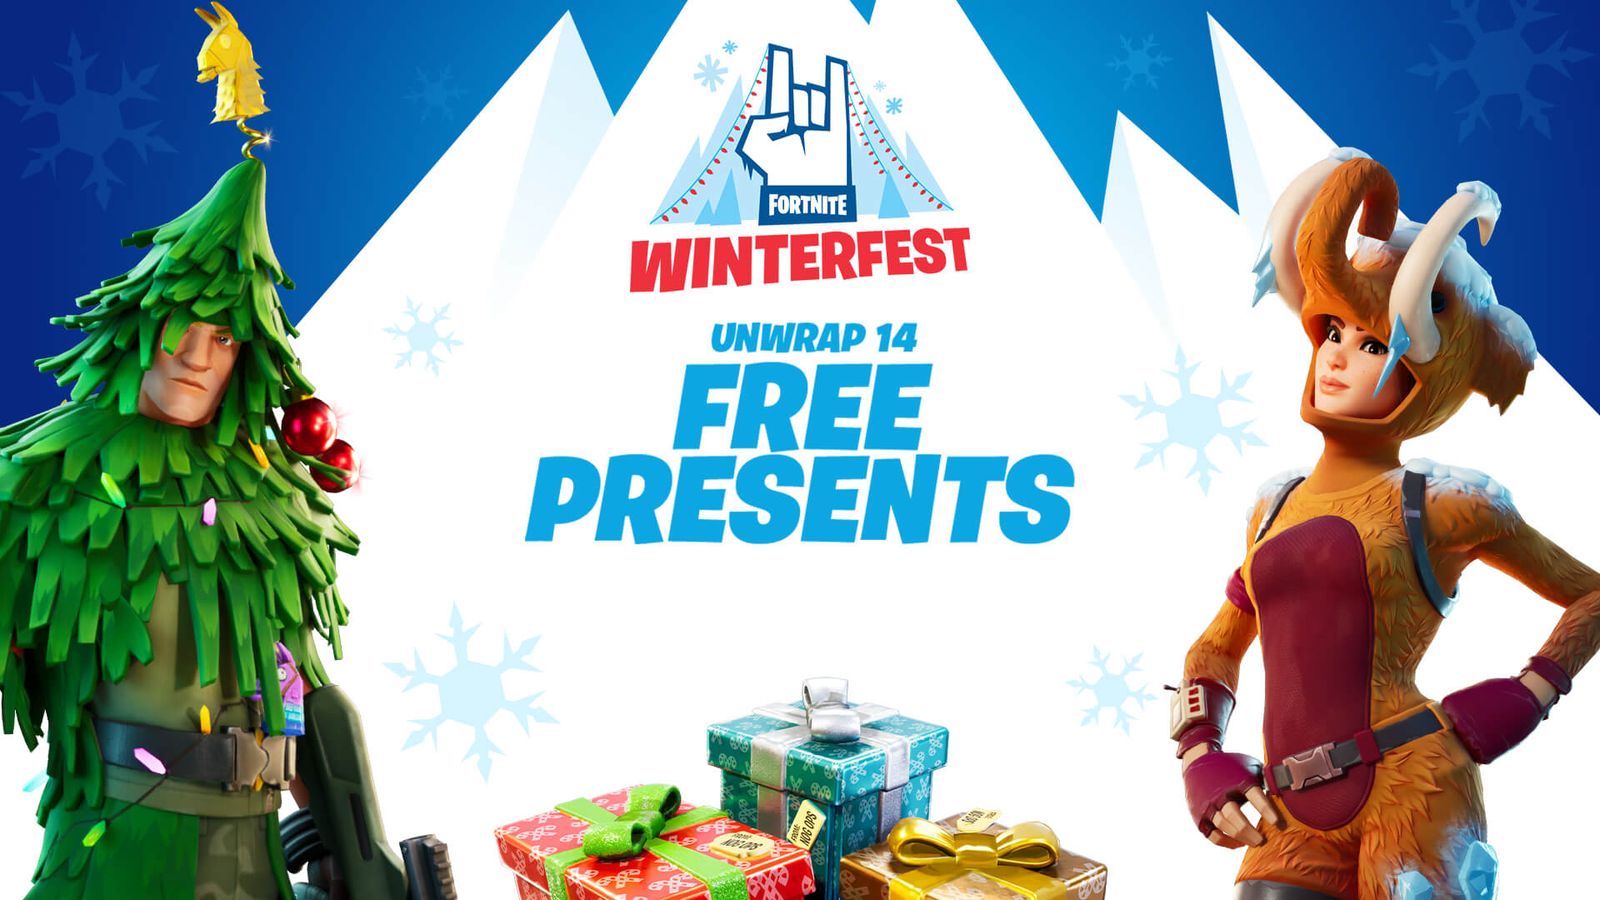 Fortnite Winterfest 2019 With Presents and Challenges Begins